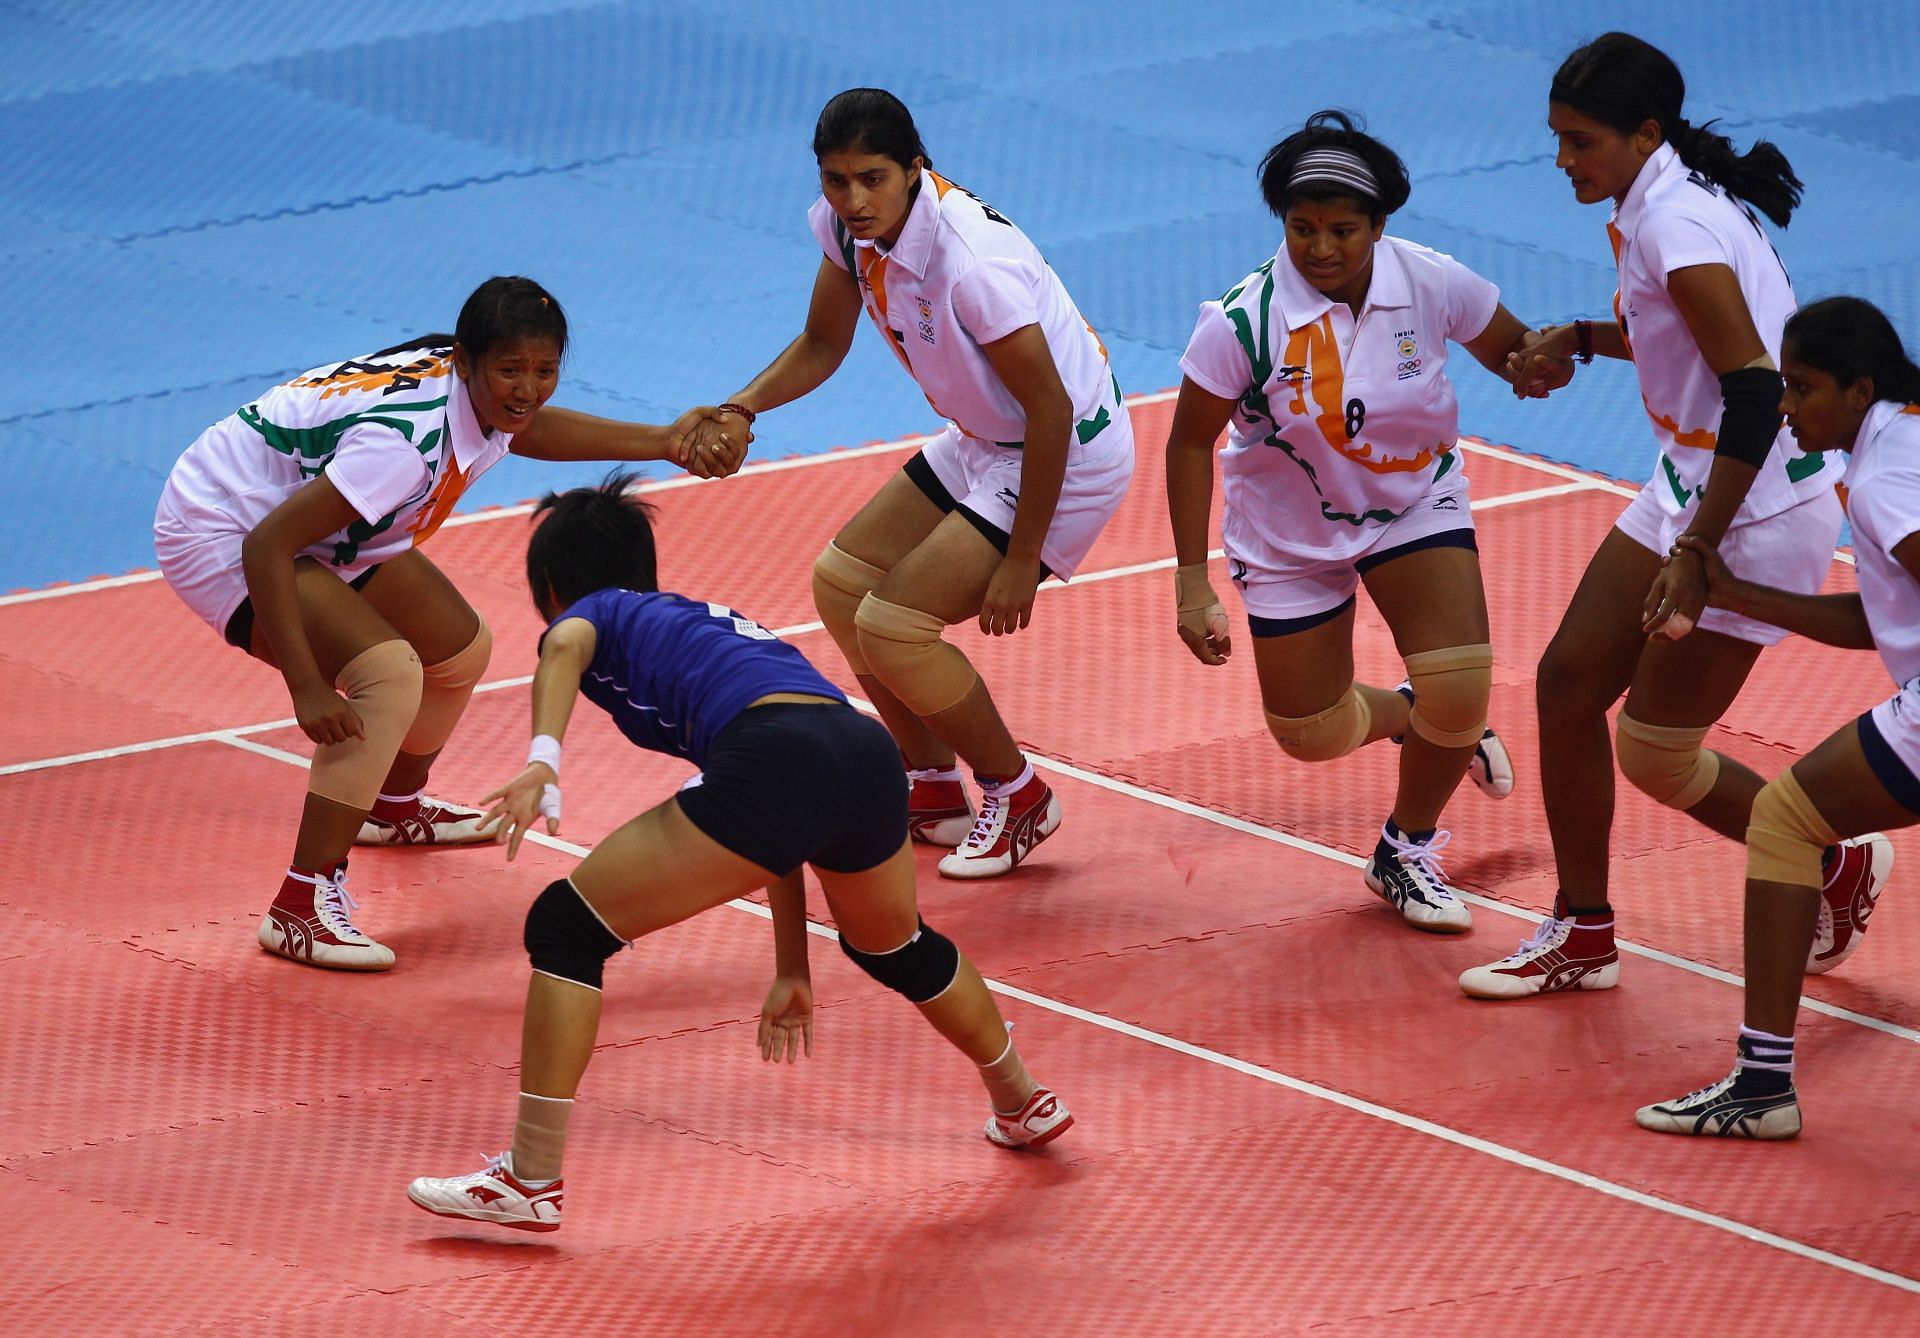 16th Asian Games - Day 14: Girls in action during Kabaddi match